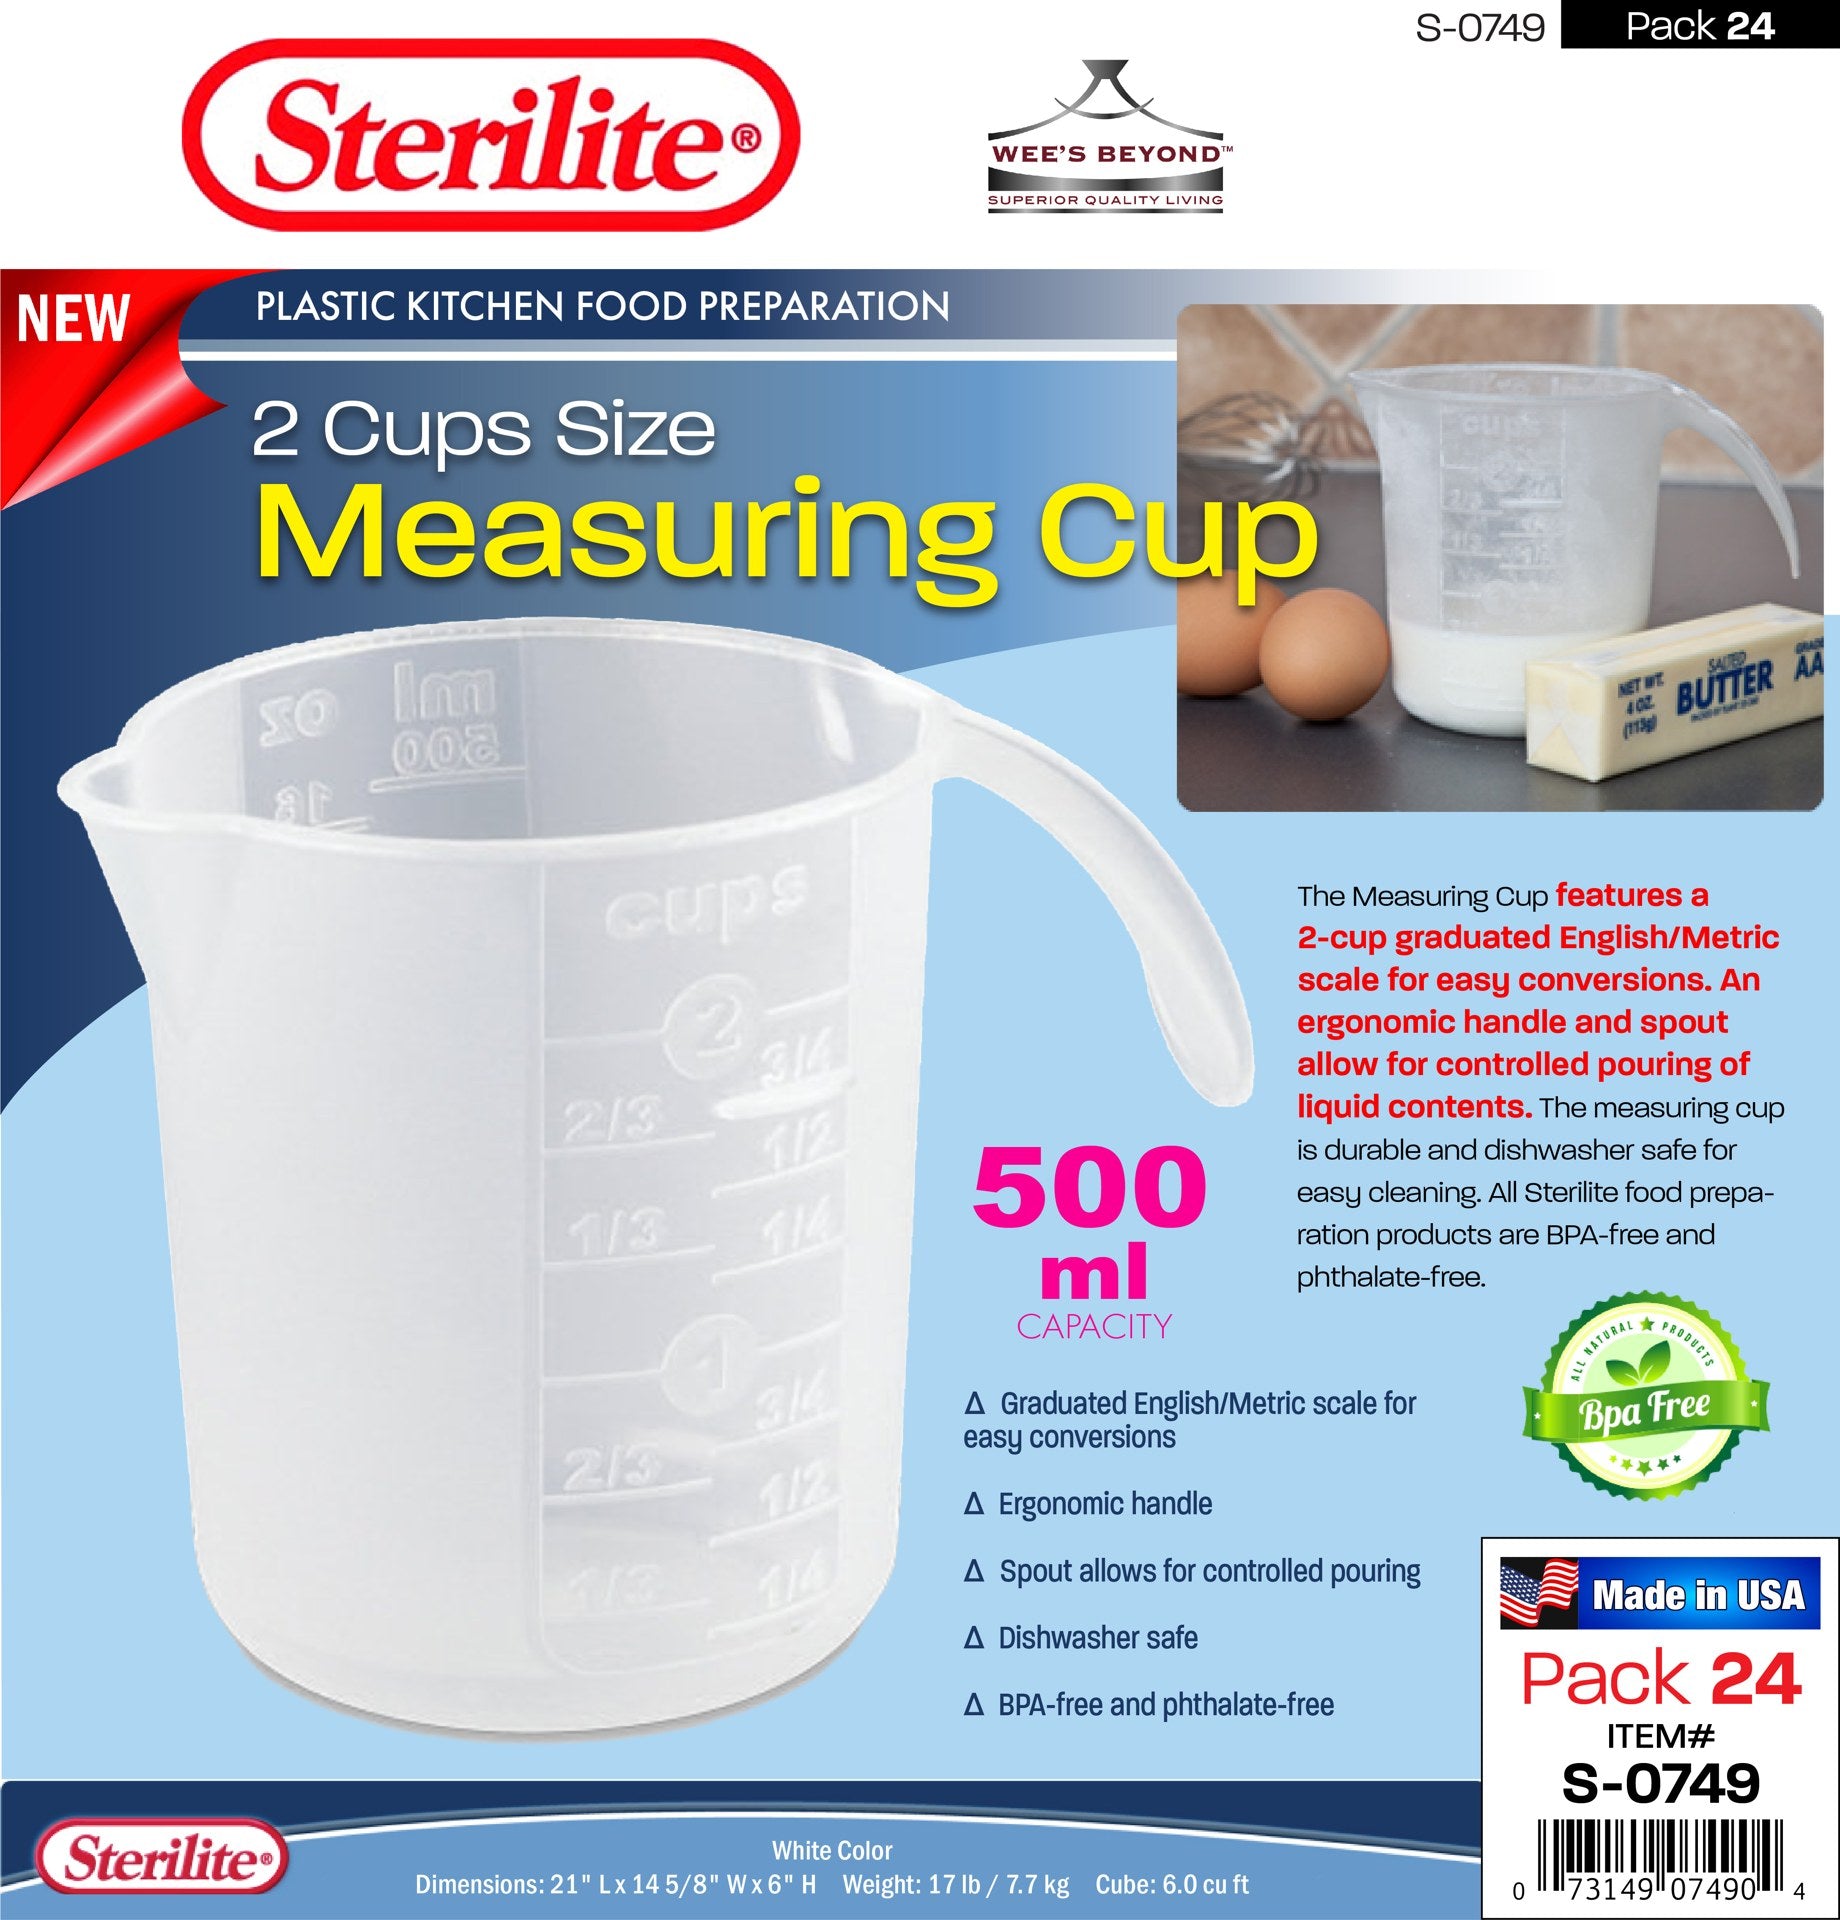 measurements - What's the size of the plastic cup that came with